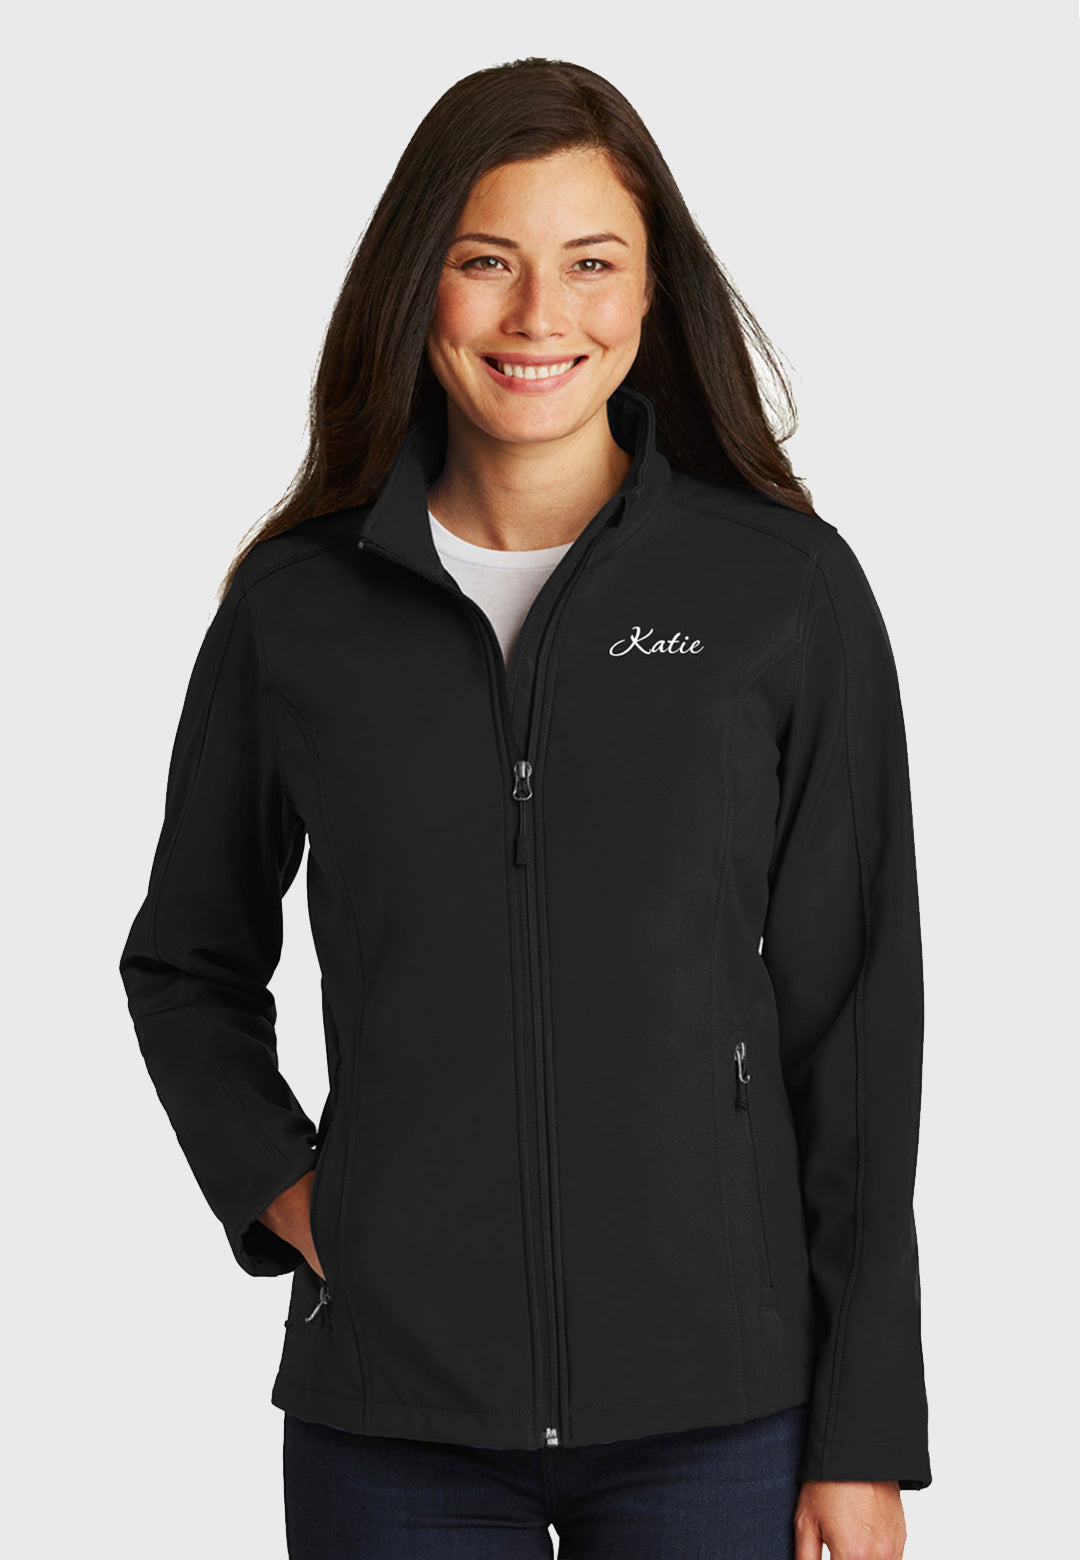 In Your Dreams Farm Port Authority® Ladies + Youth Core Soft Shell Jacket - Black